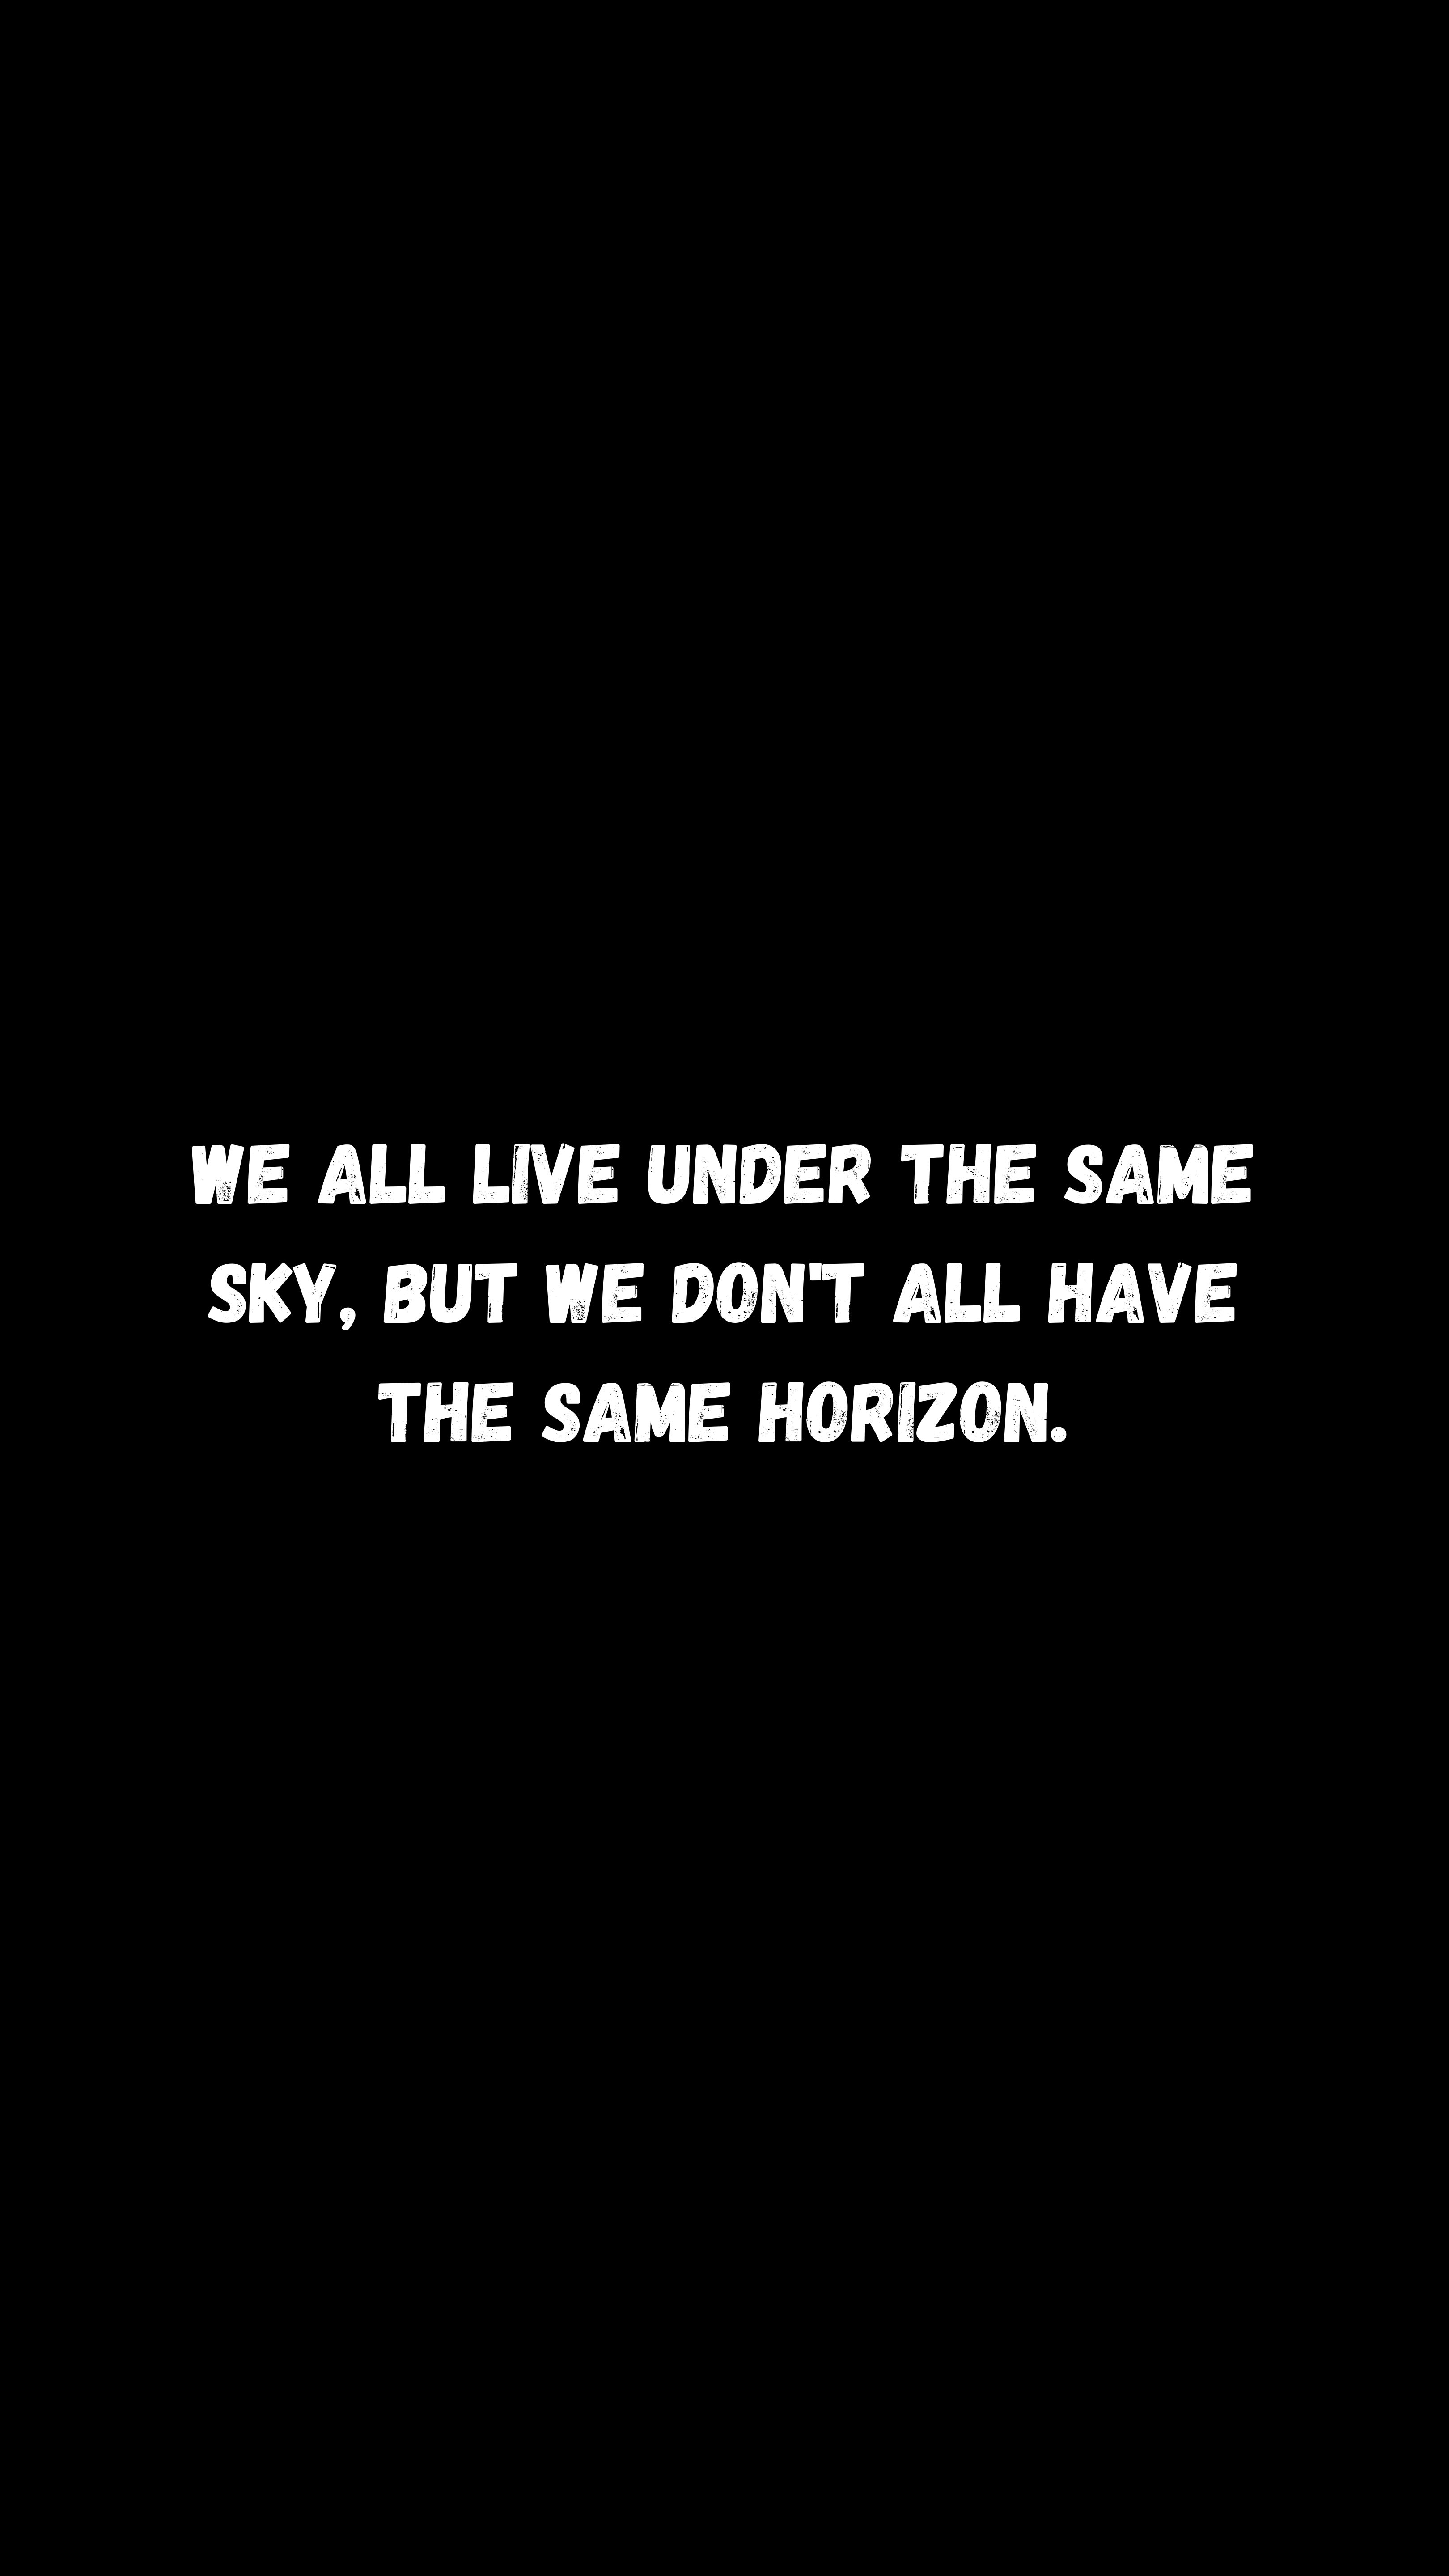 quote, meaning, sky, horizon, words, quotation for android